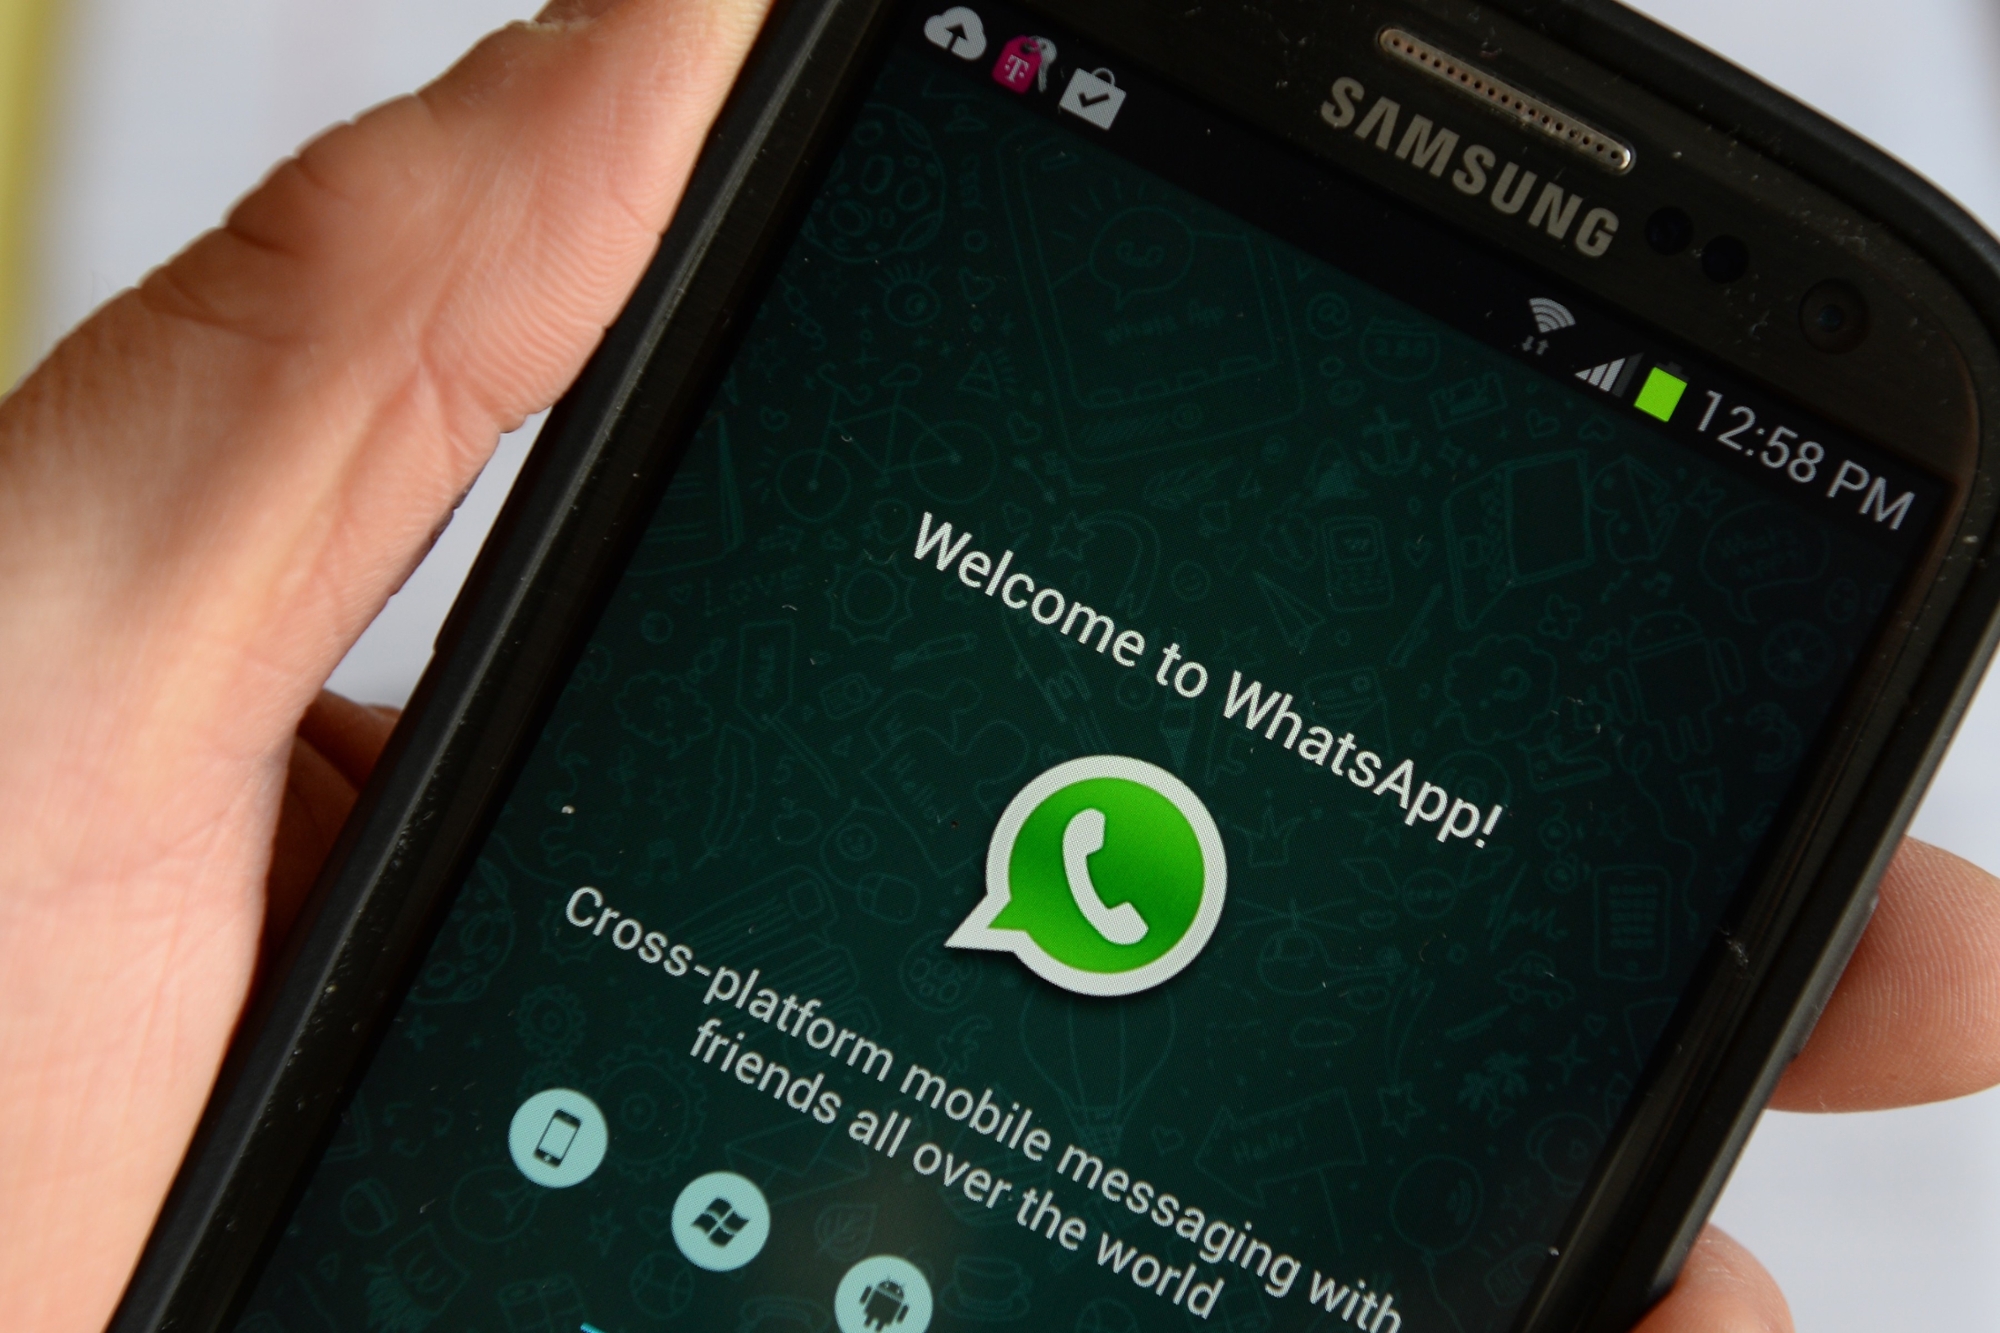 WhatsApp will be incompatible with forty smartphones as of May 31

